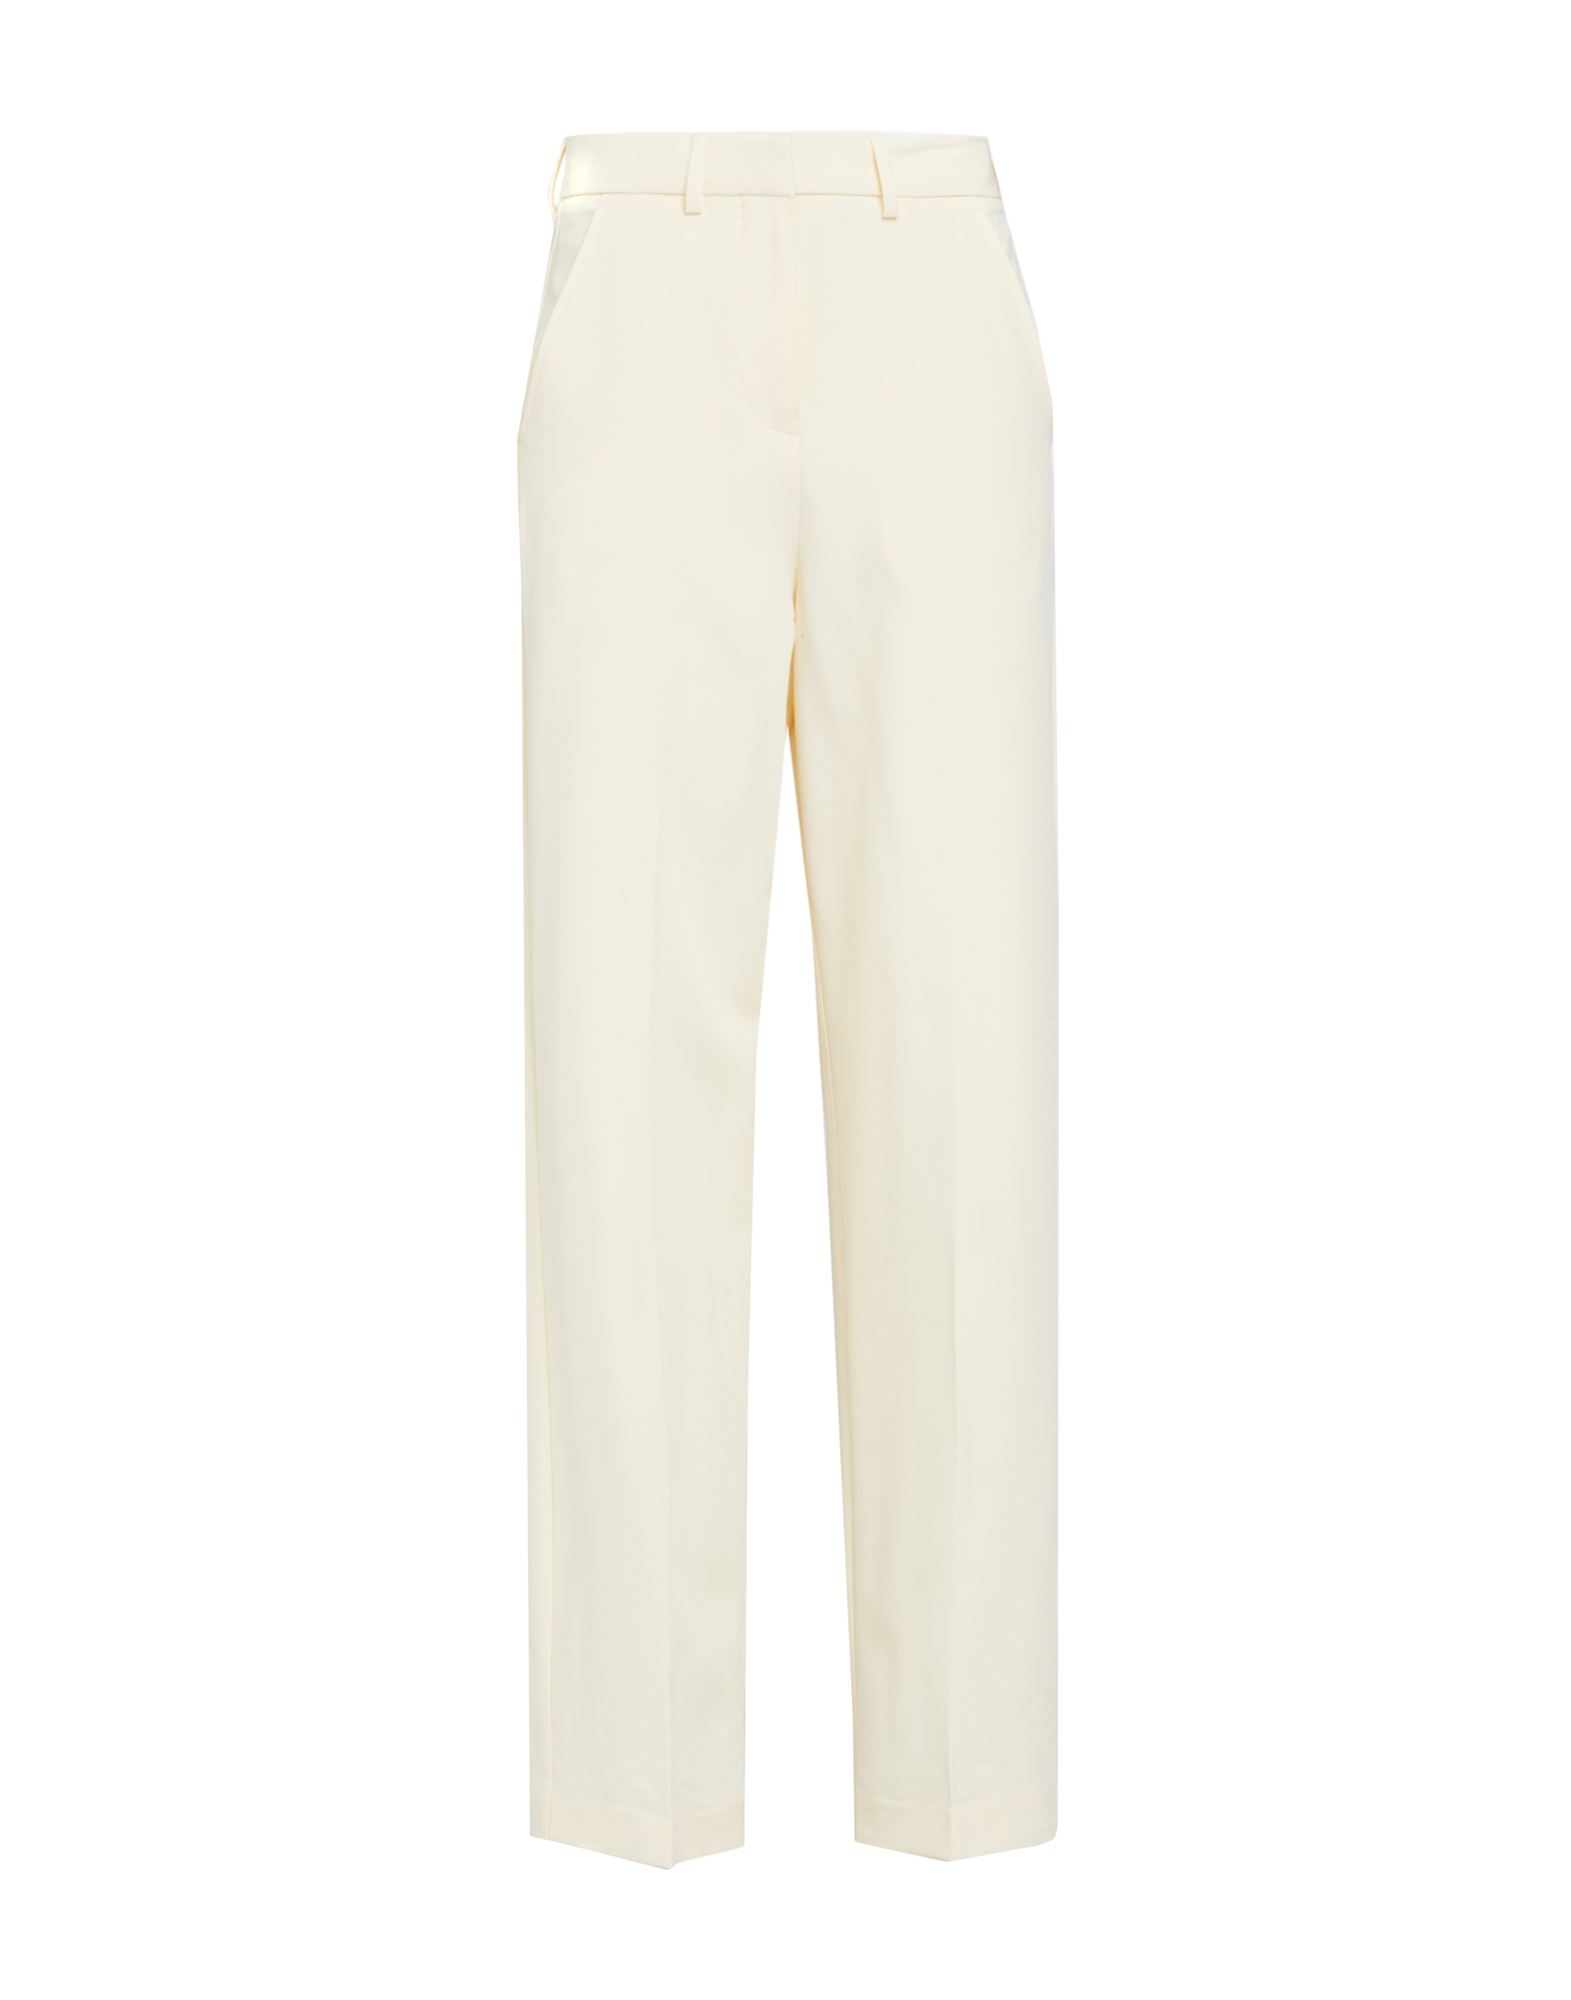 Jjxx By Jack & Jones Woman Pants Cream Size 31w-32l Recycled Polyester, Viscose, Elastane In White